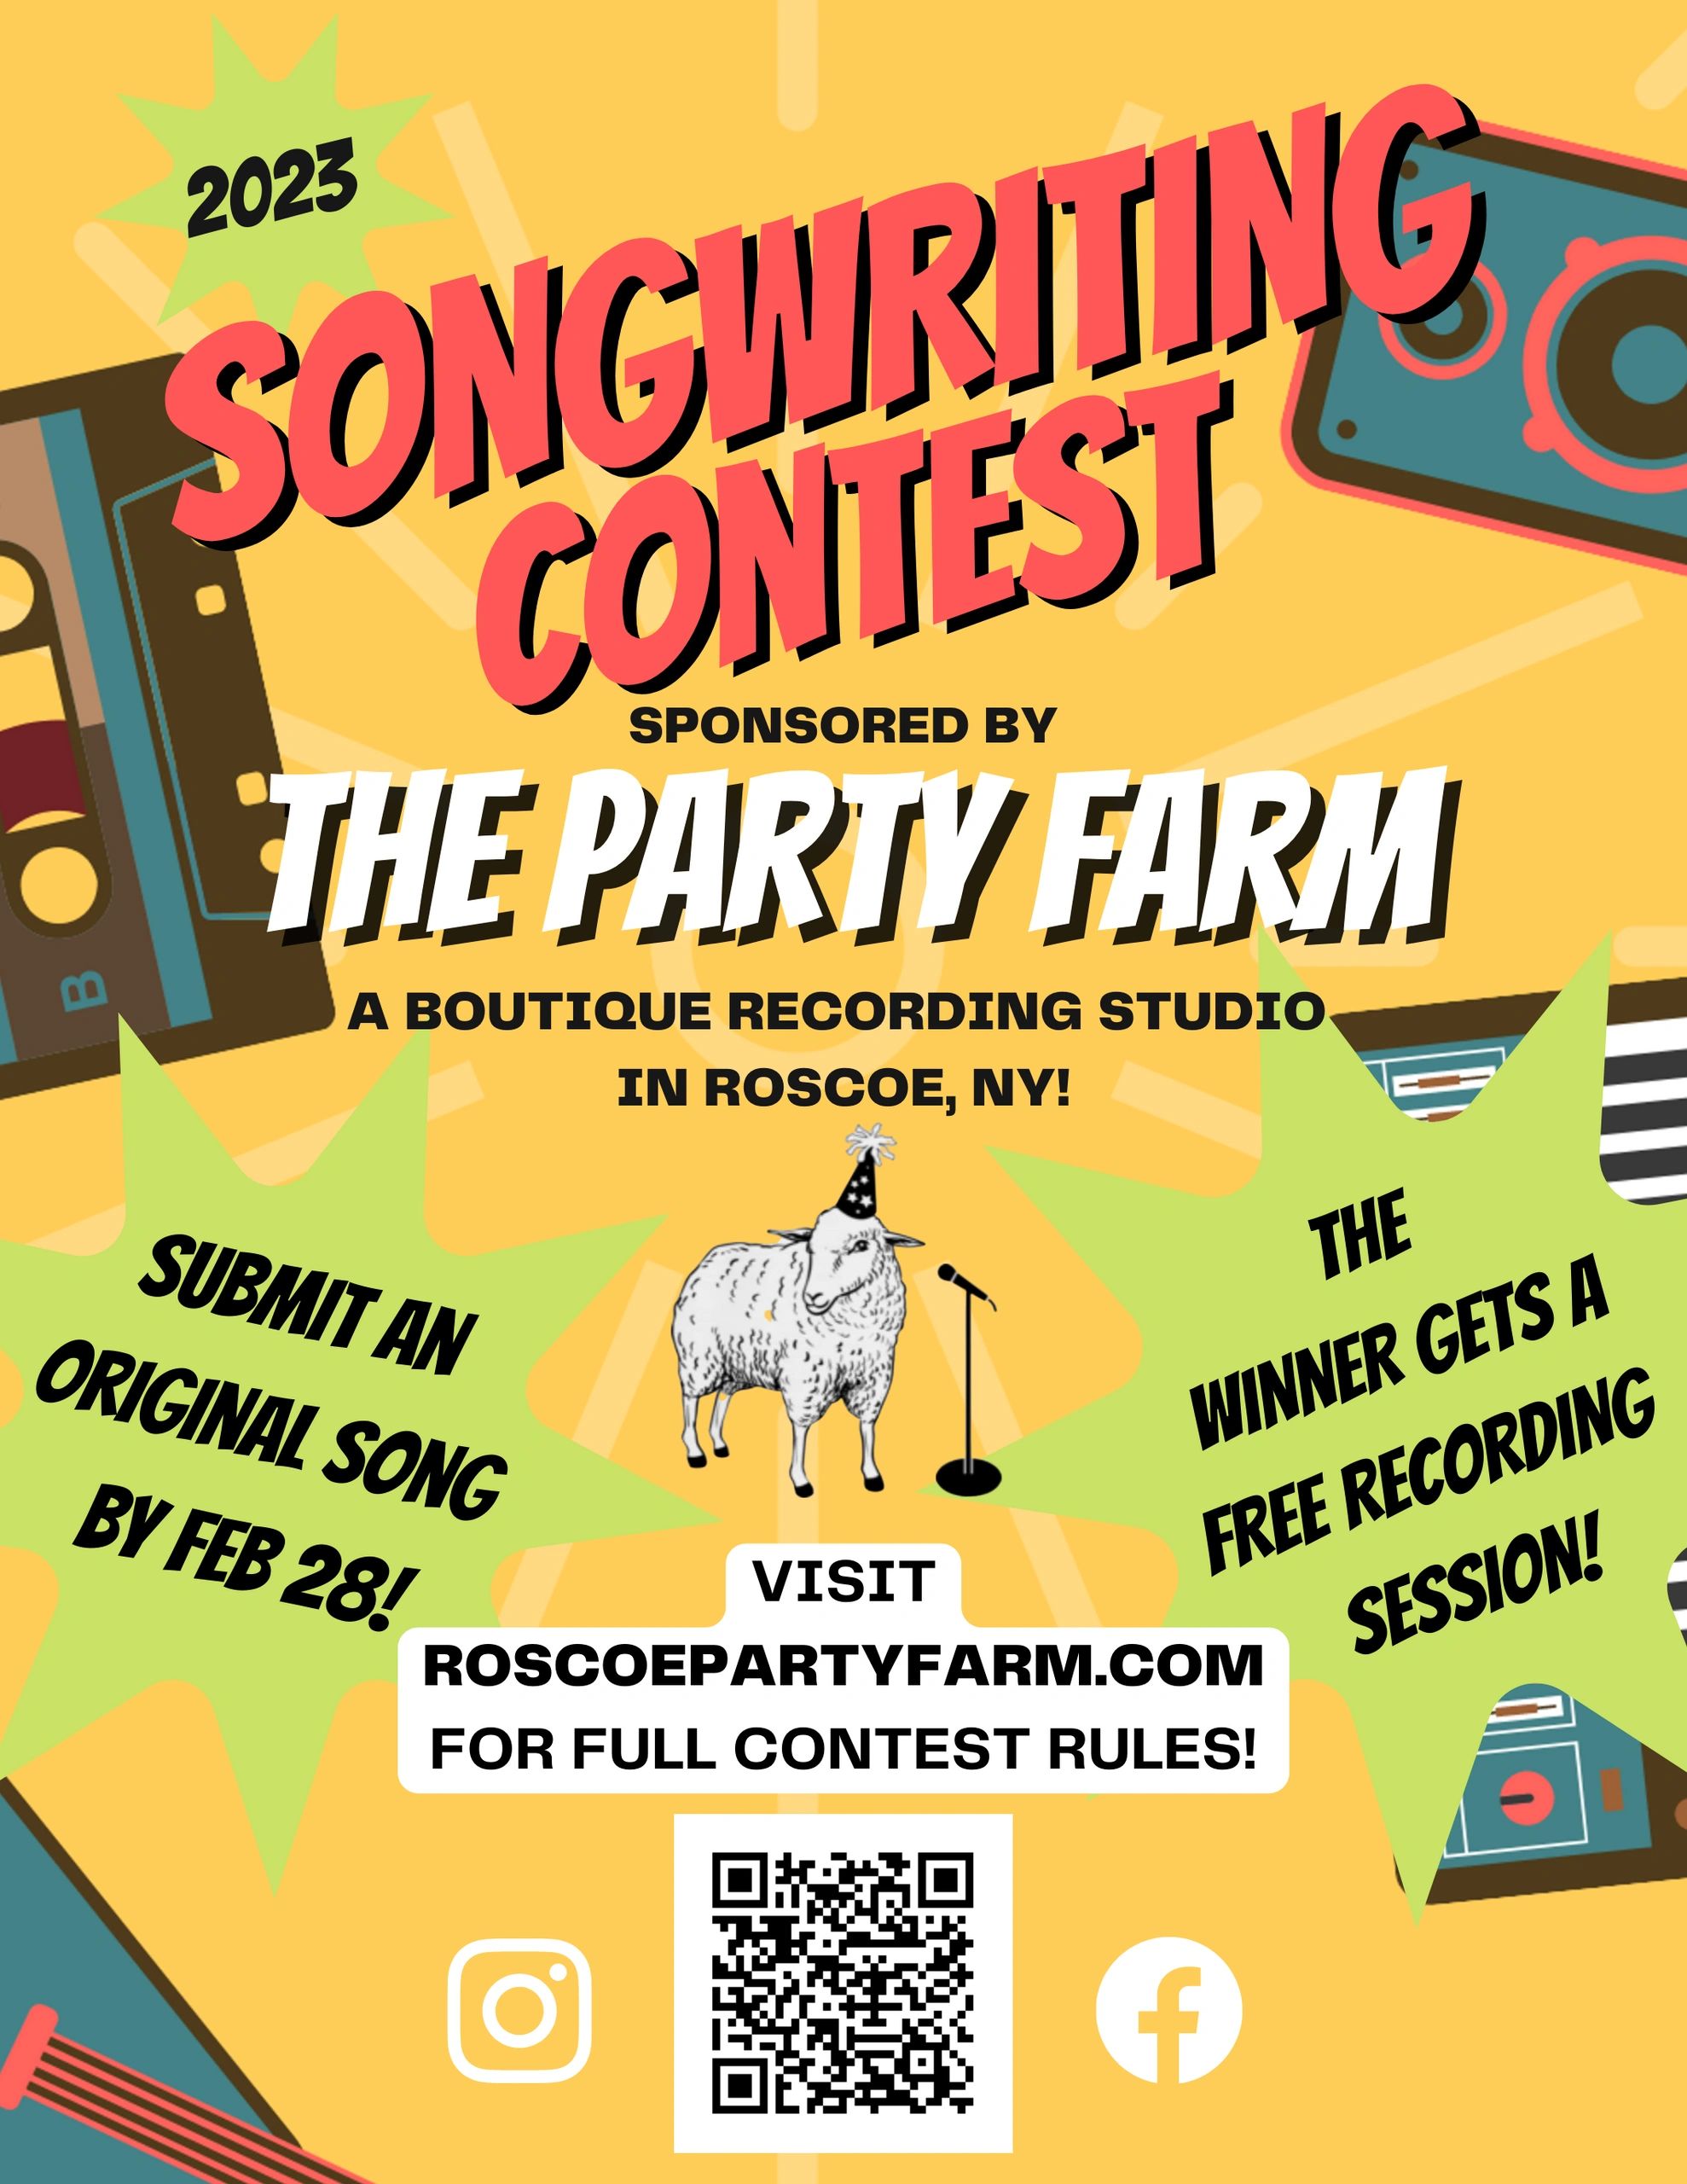 Enter The Party Farm's 2023 Songwriting Contest!